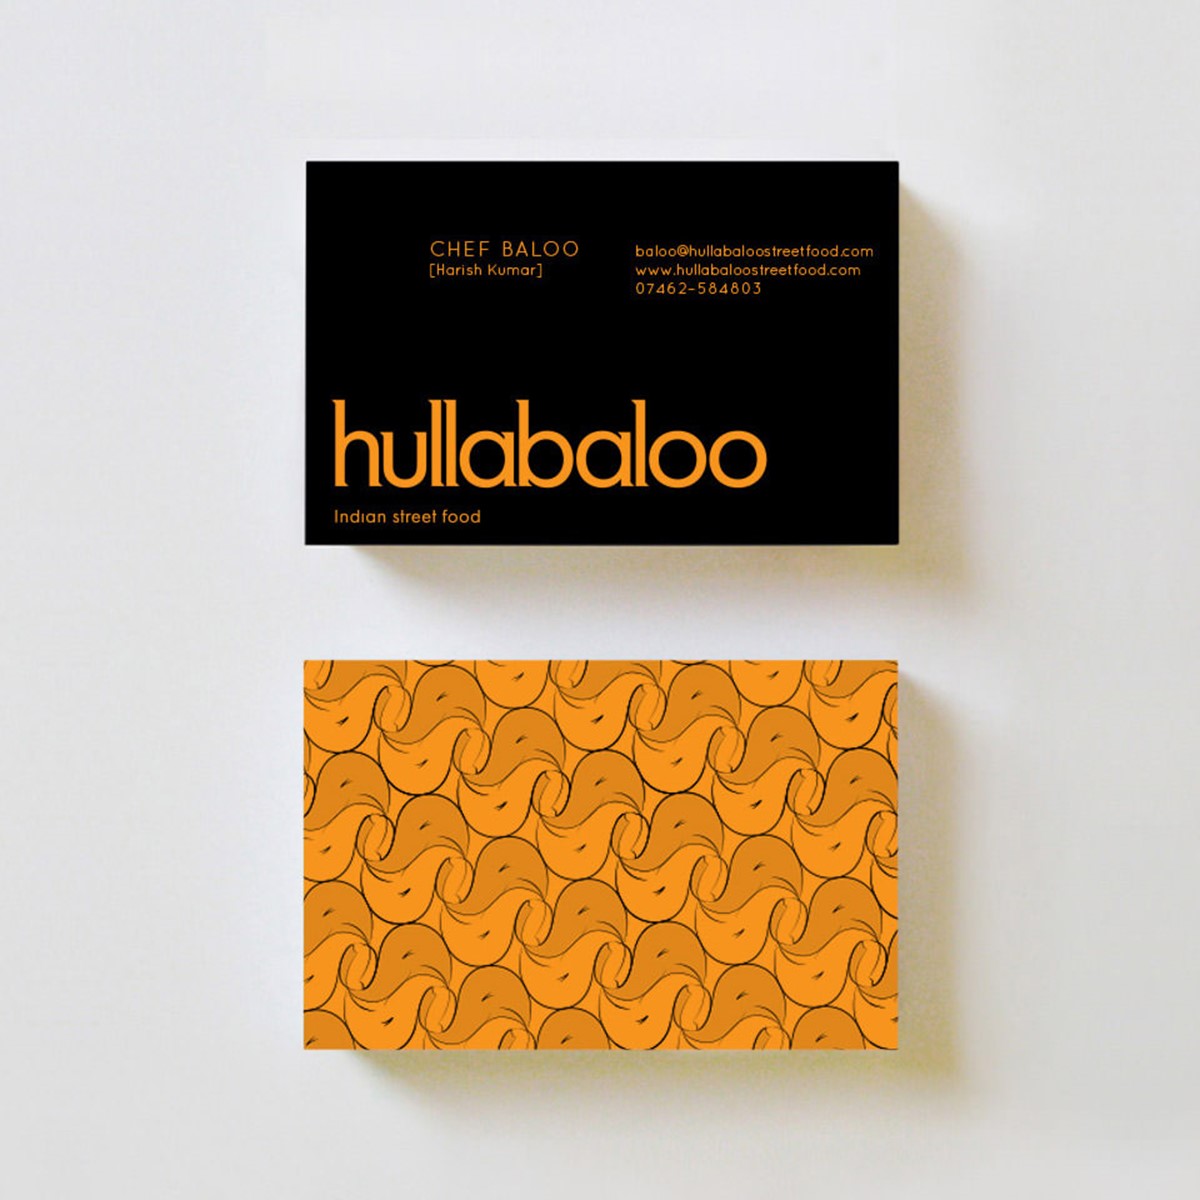 Hullabaloo. Indian Street Food. Business Cards. Brand identity design by Superfried.